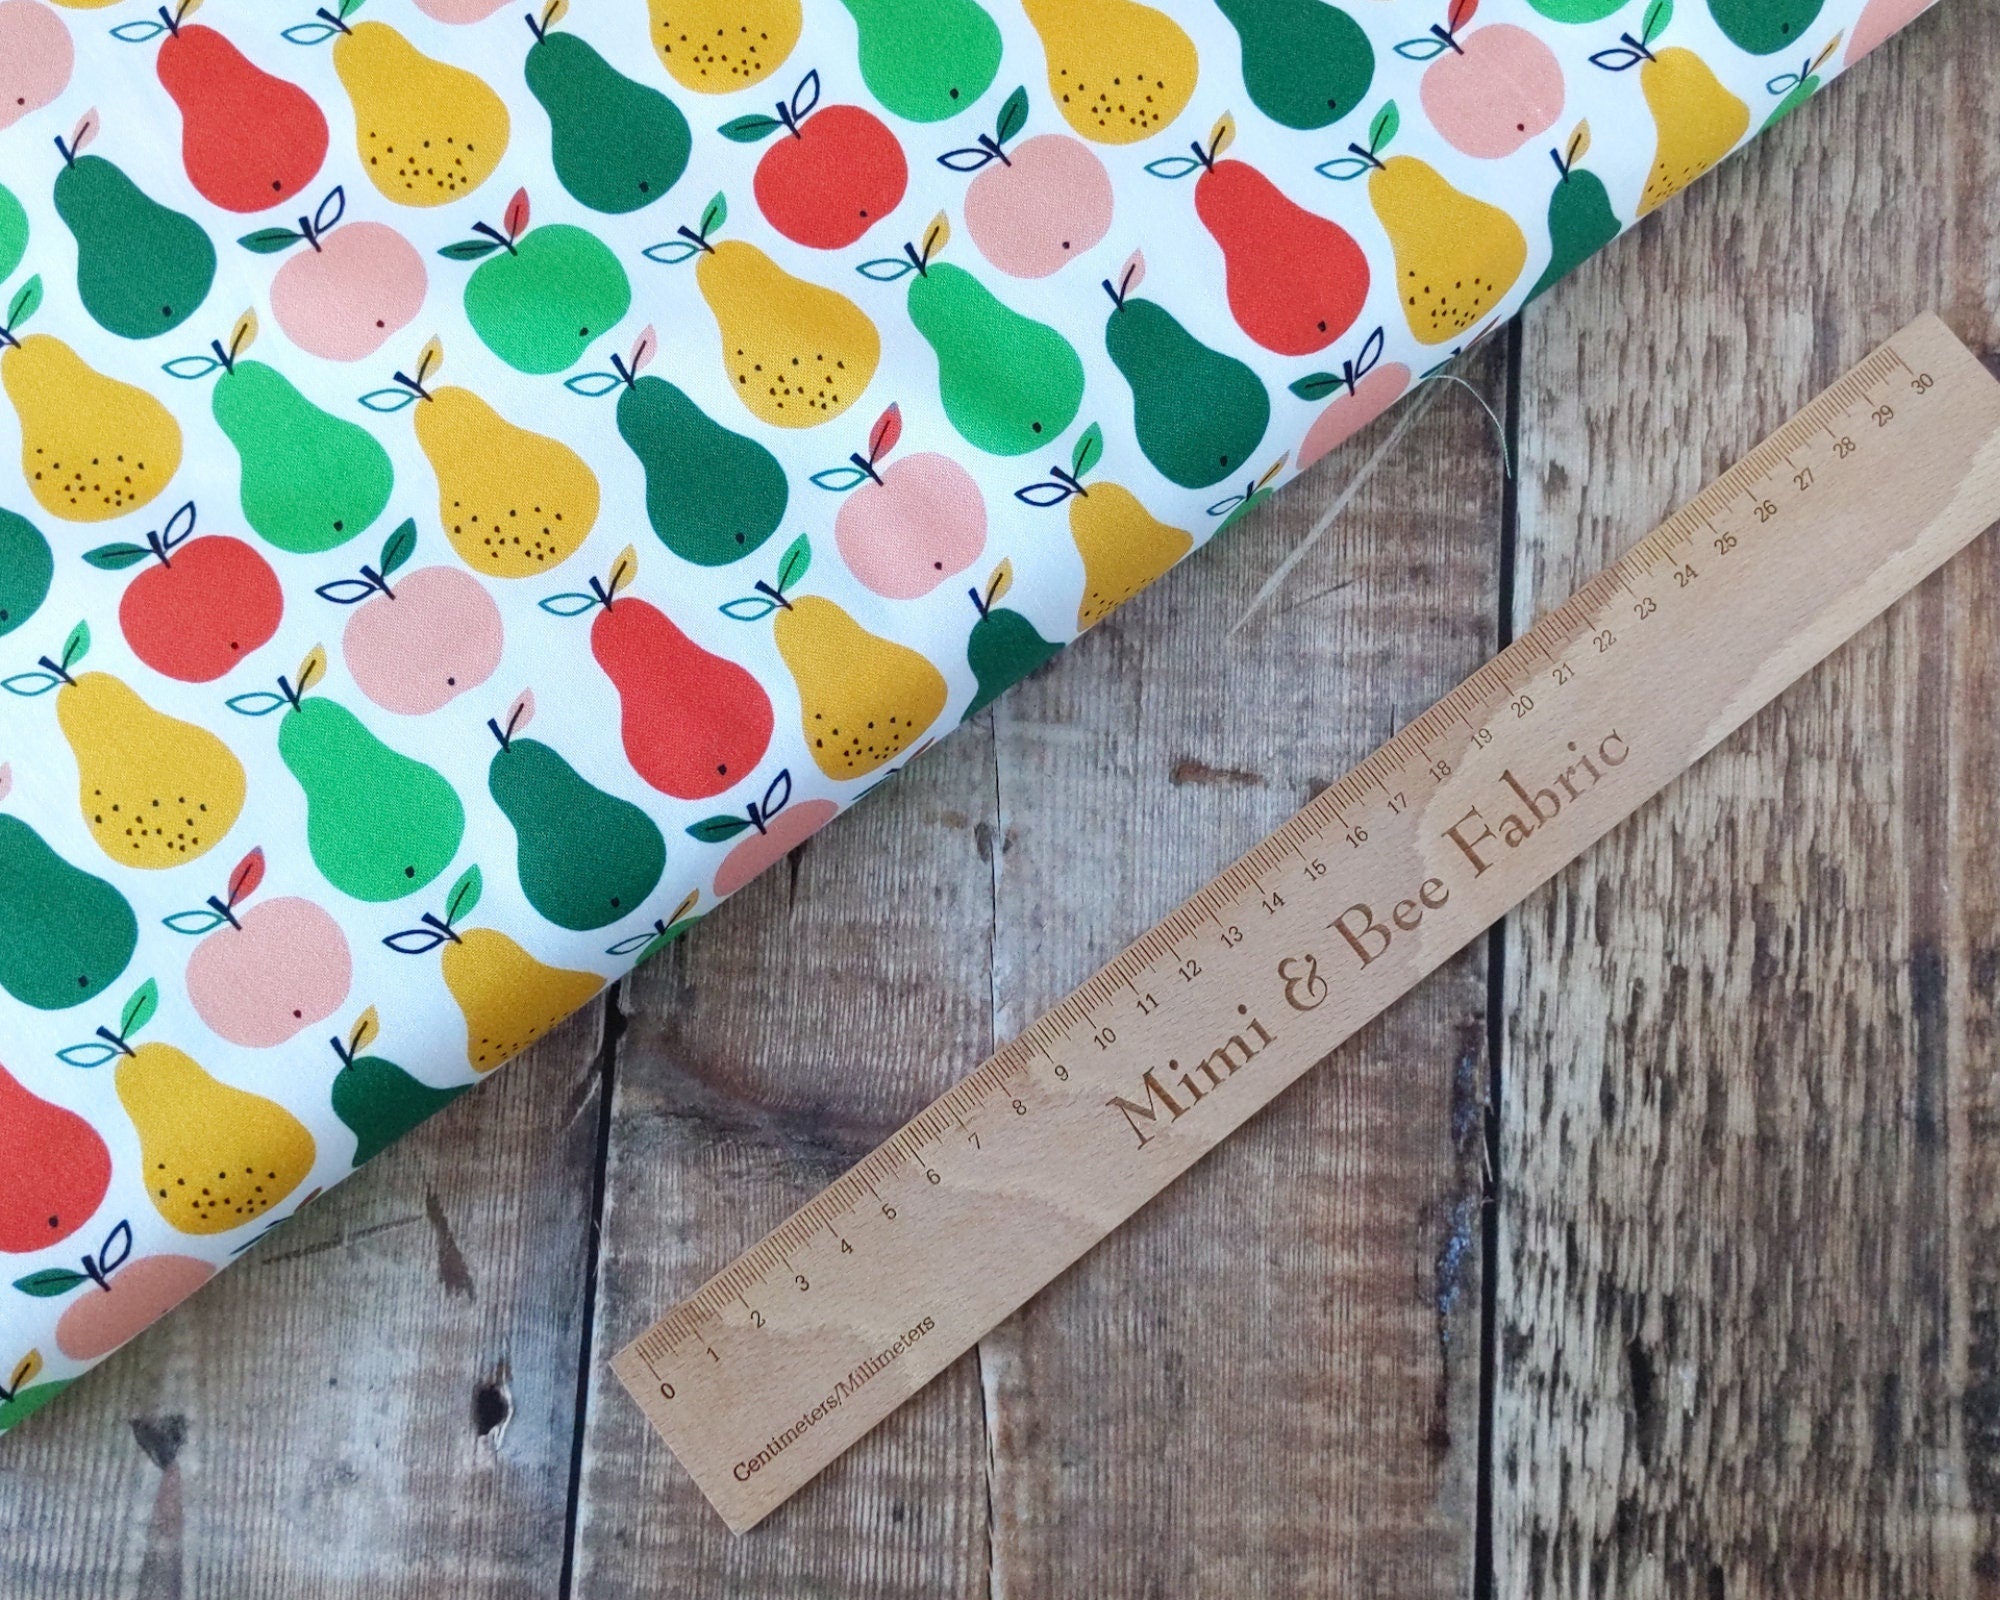 Apples and pears on white cotton fabric - Acorn Wood by Dashwood Studio